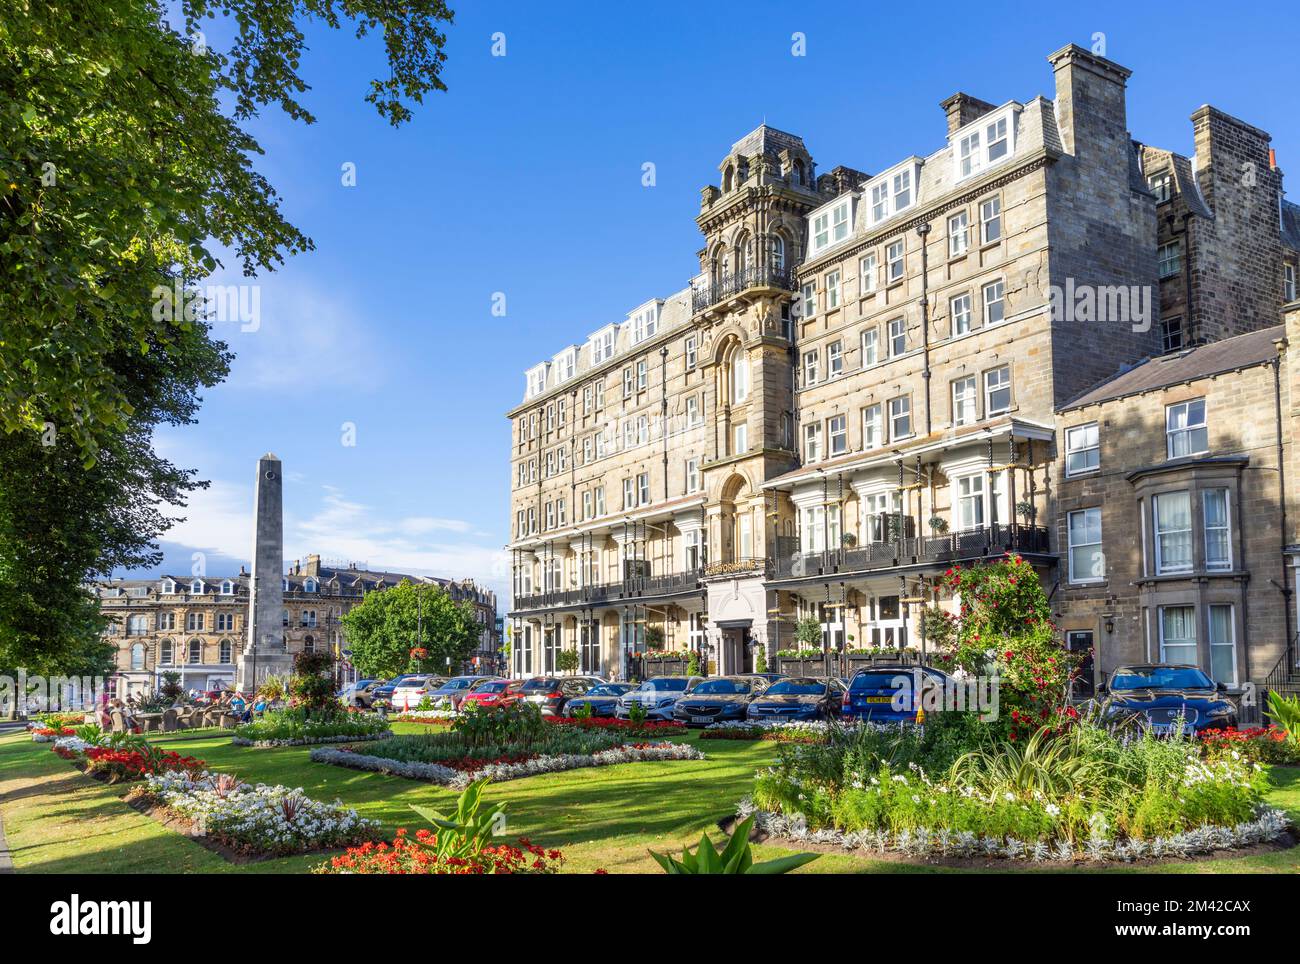 Harrogate North Yorkshire Harrogate Yorkshire The Yorkshire Hotel Cenotaph and Gardens Harrogate Yorkshire Angleterre GB Europe Banque D'Images